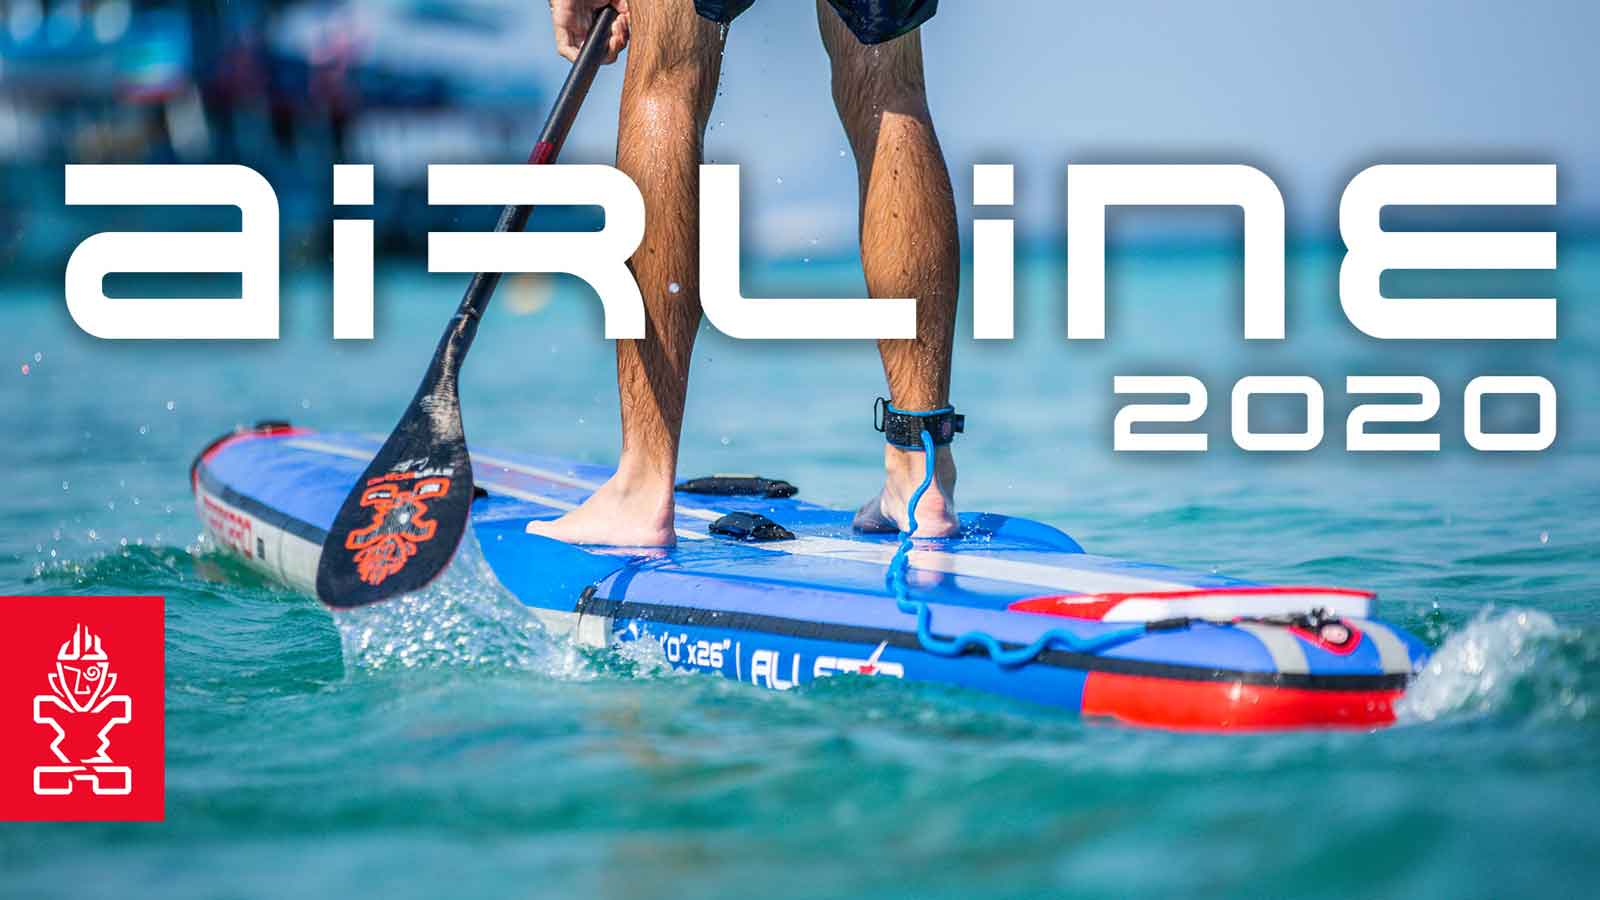 2020 All Star Airline » Starboard SUP